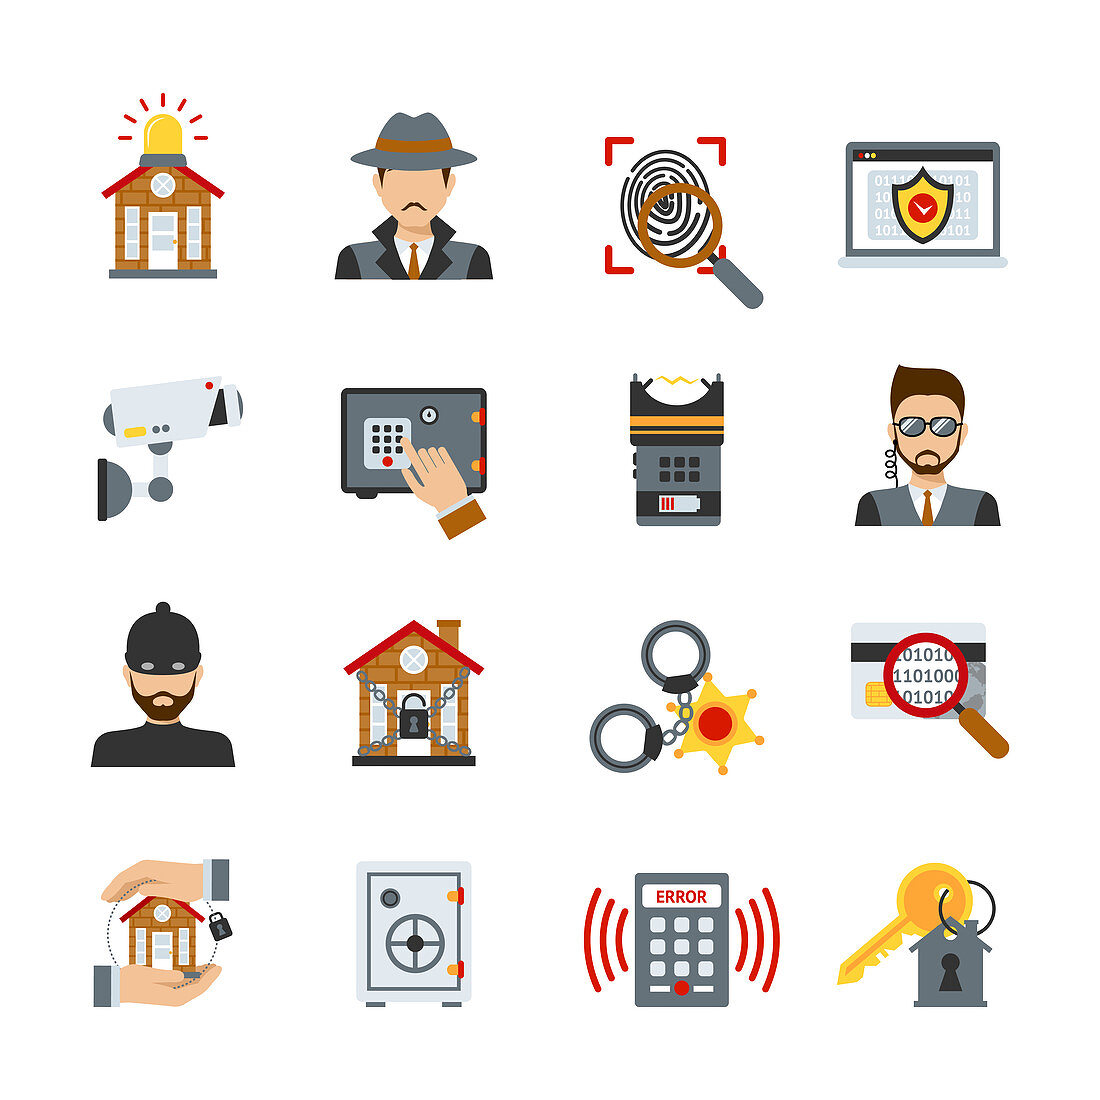 Security icons, illustration